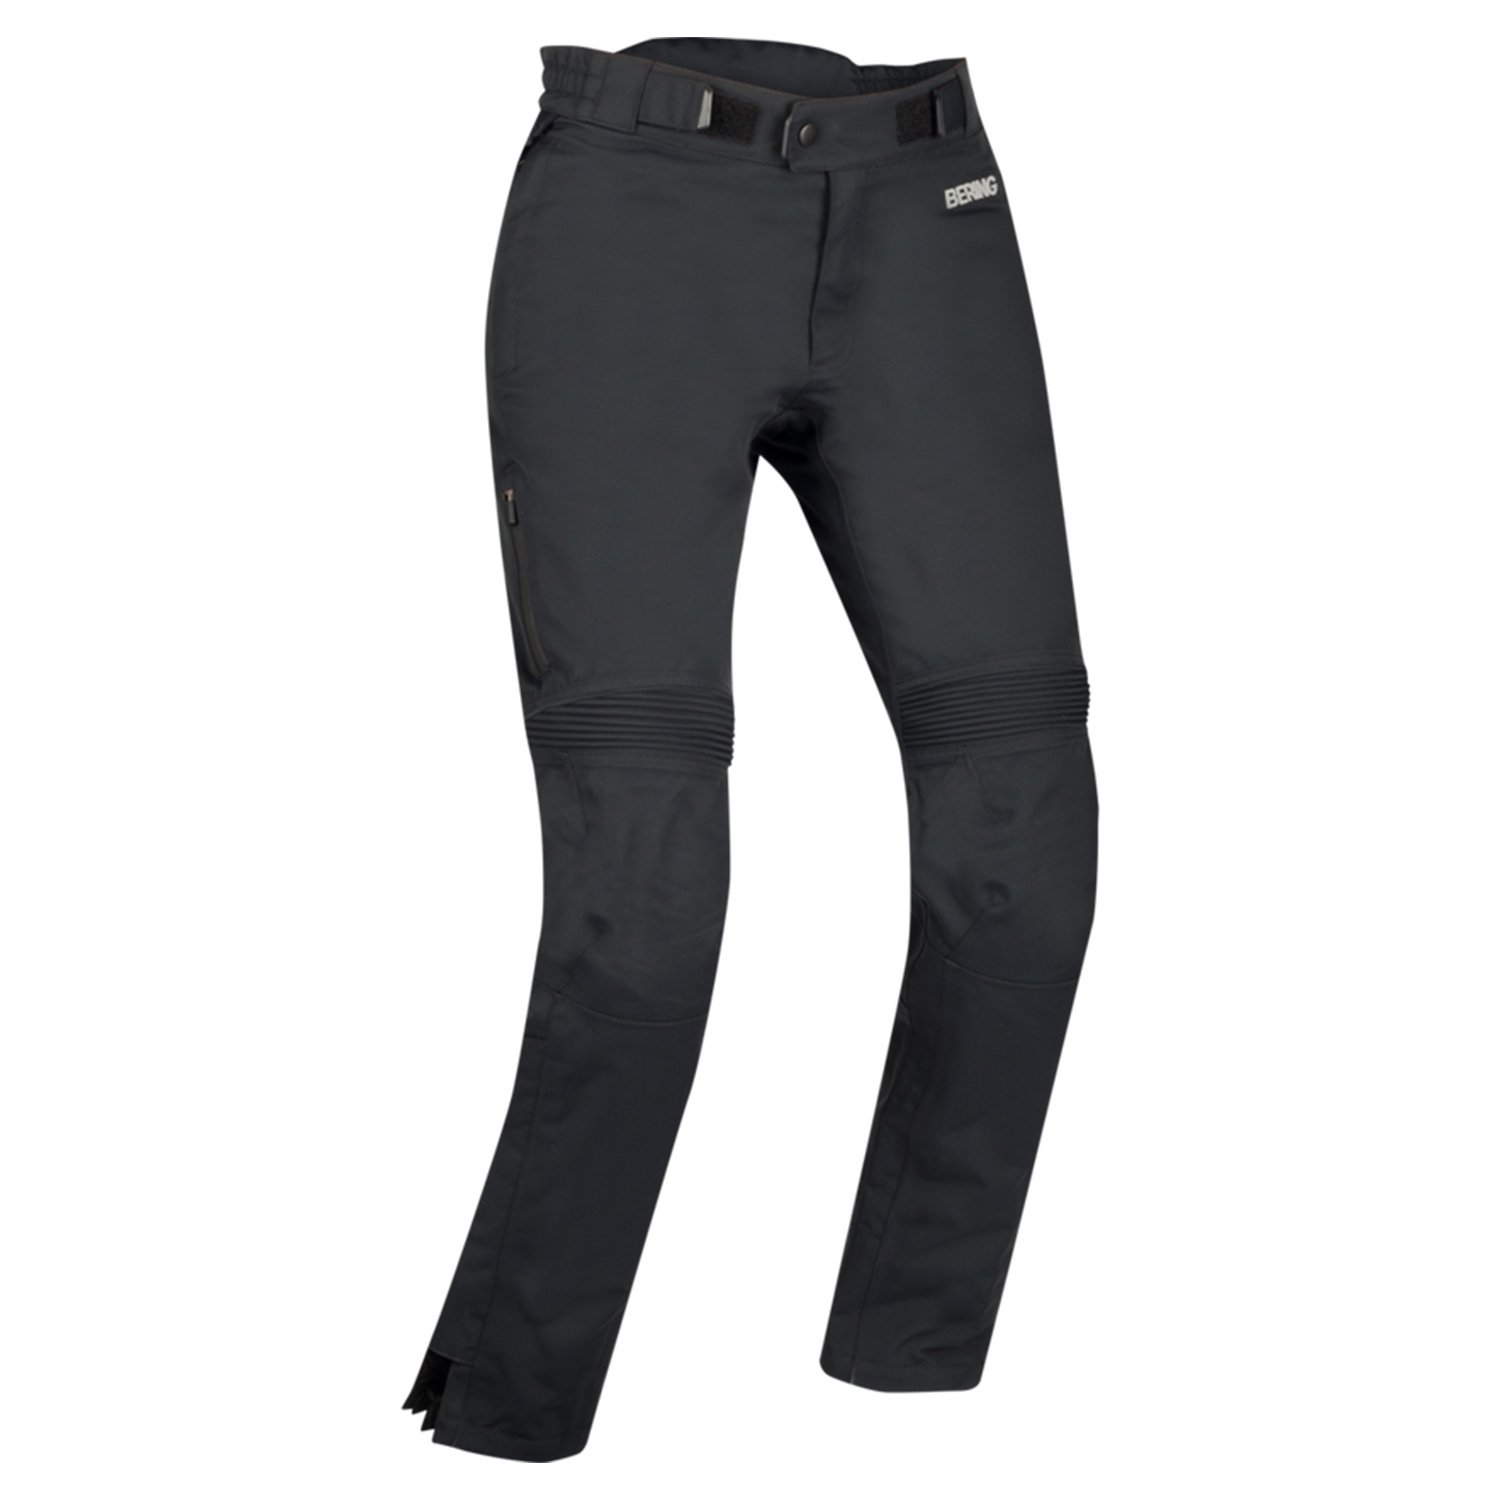 Image of Bering Lady Zephyr Trousers Black Size T1 ID 3660815180860